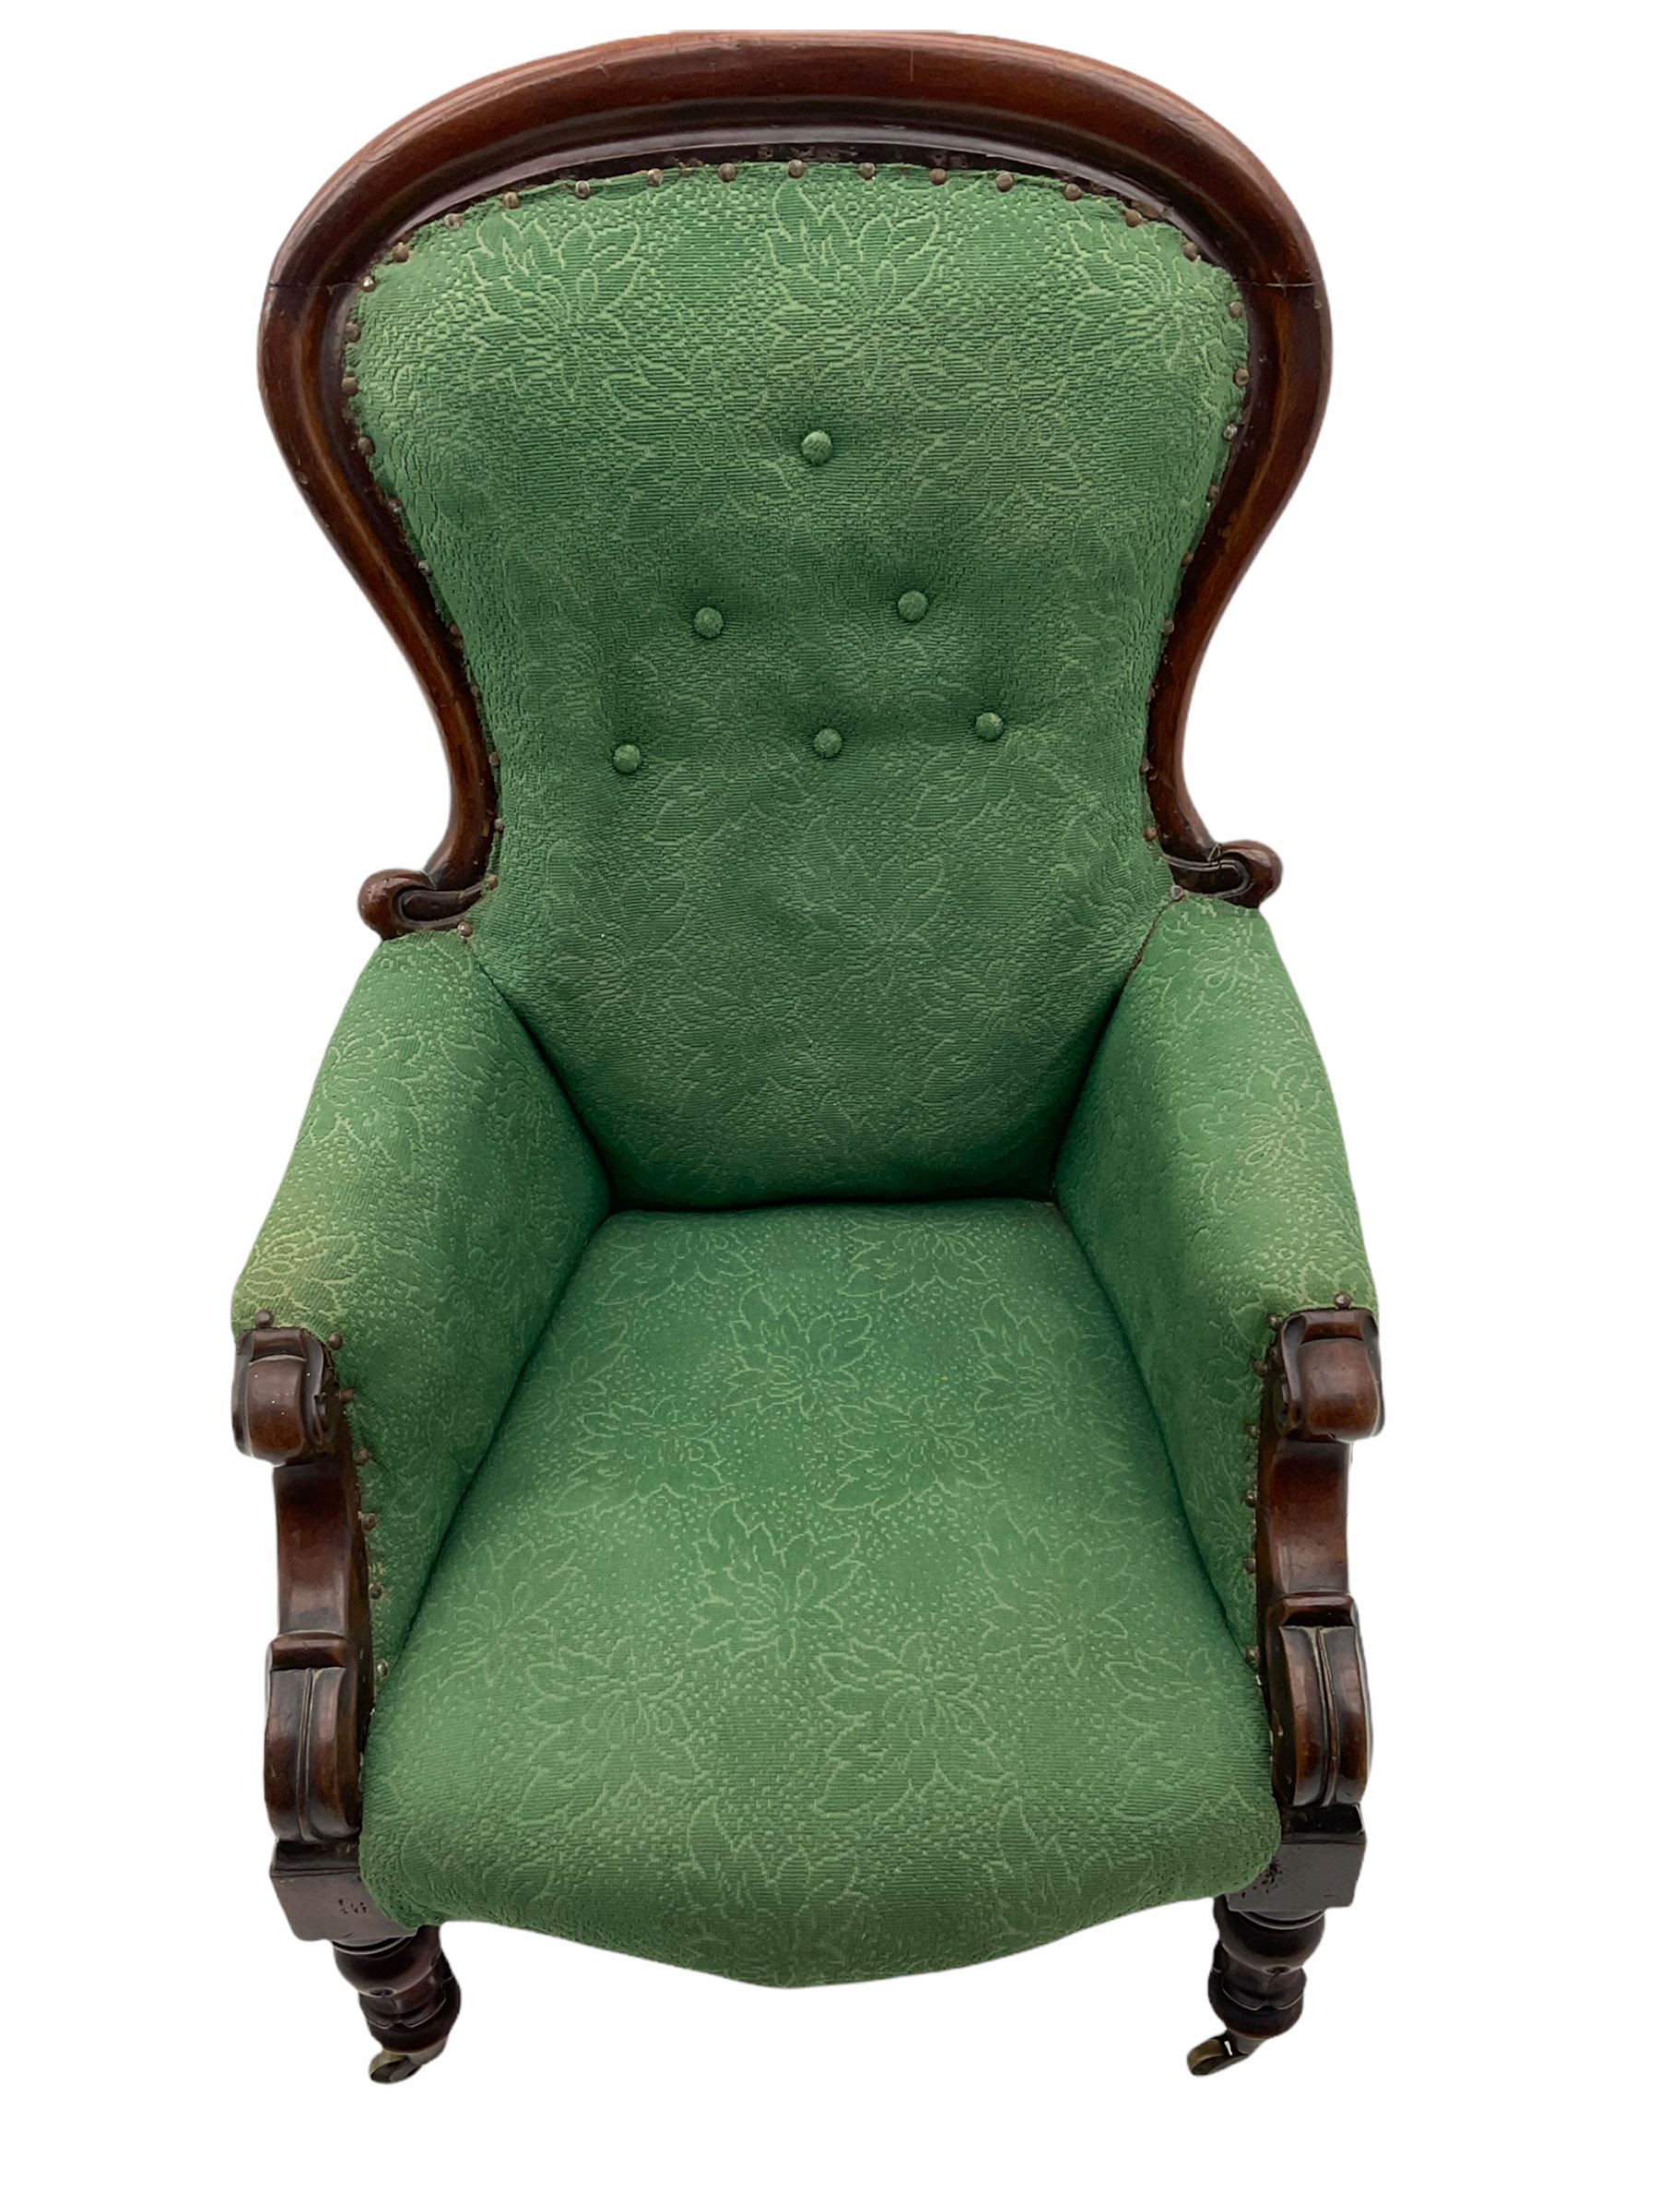 Early Victorian armchair - Image 2 of 5